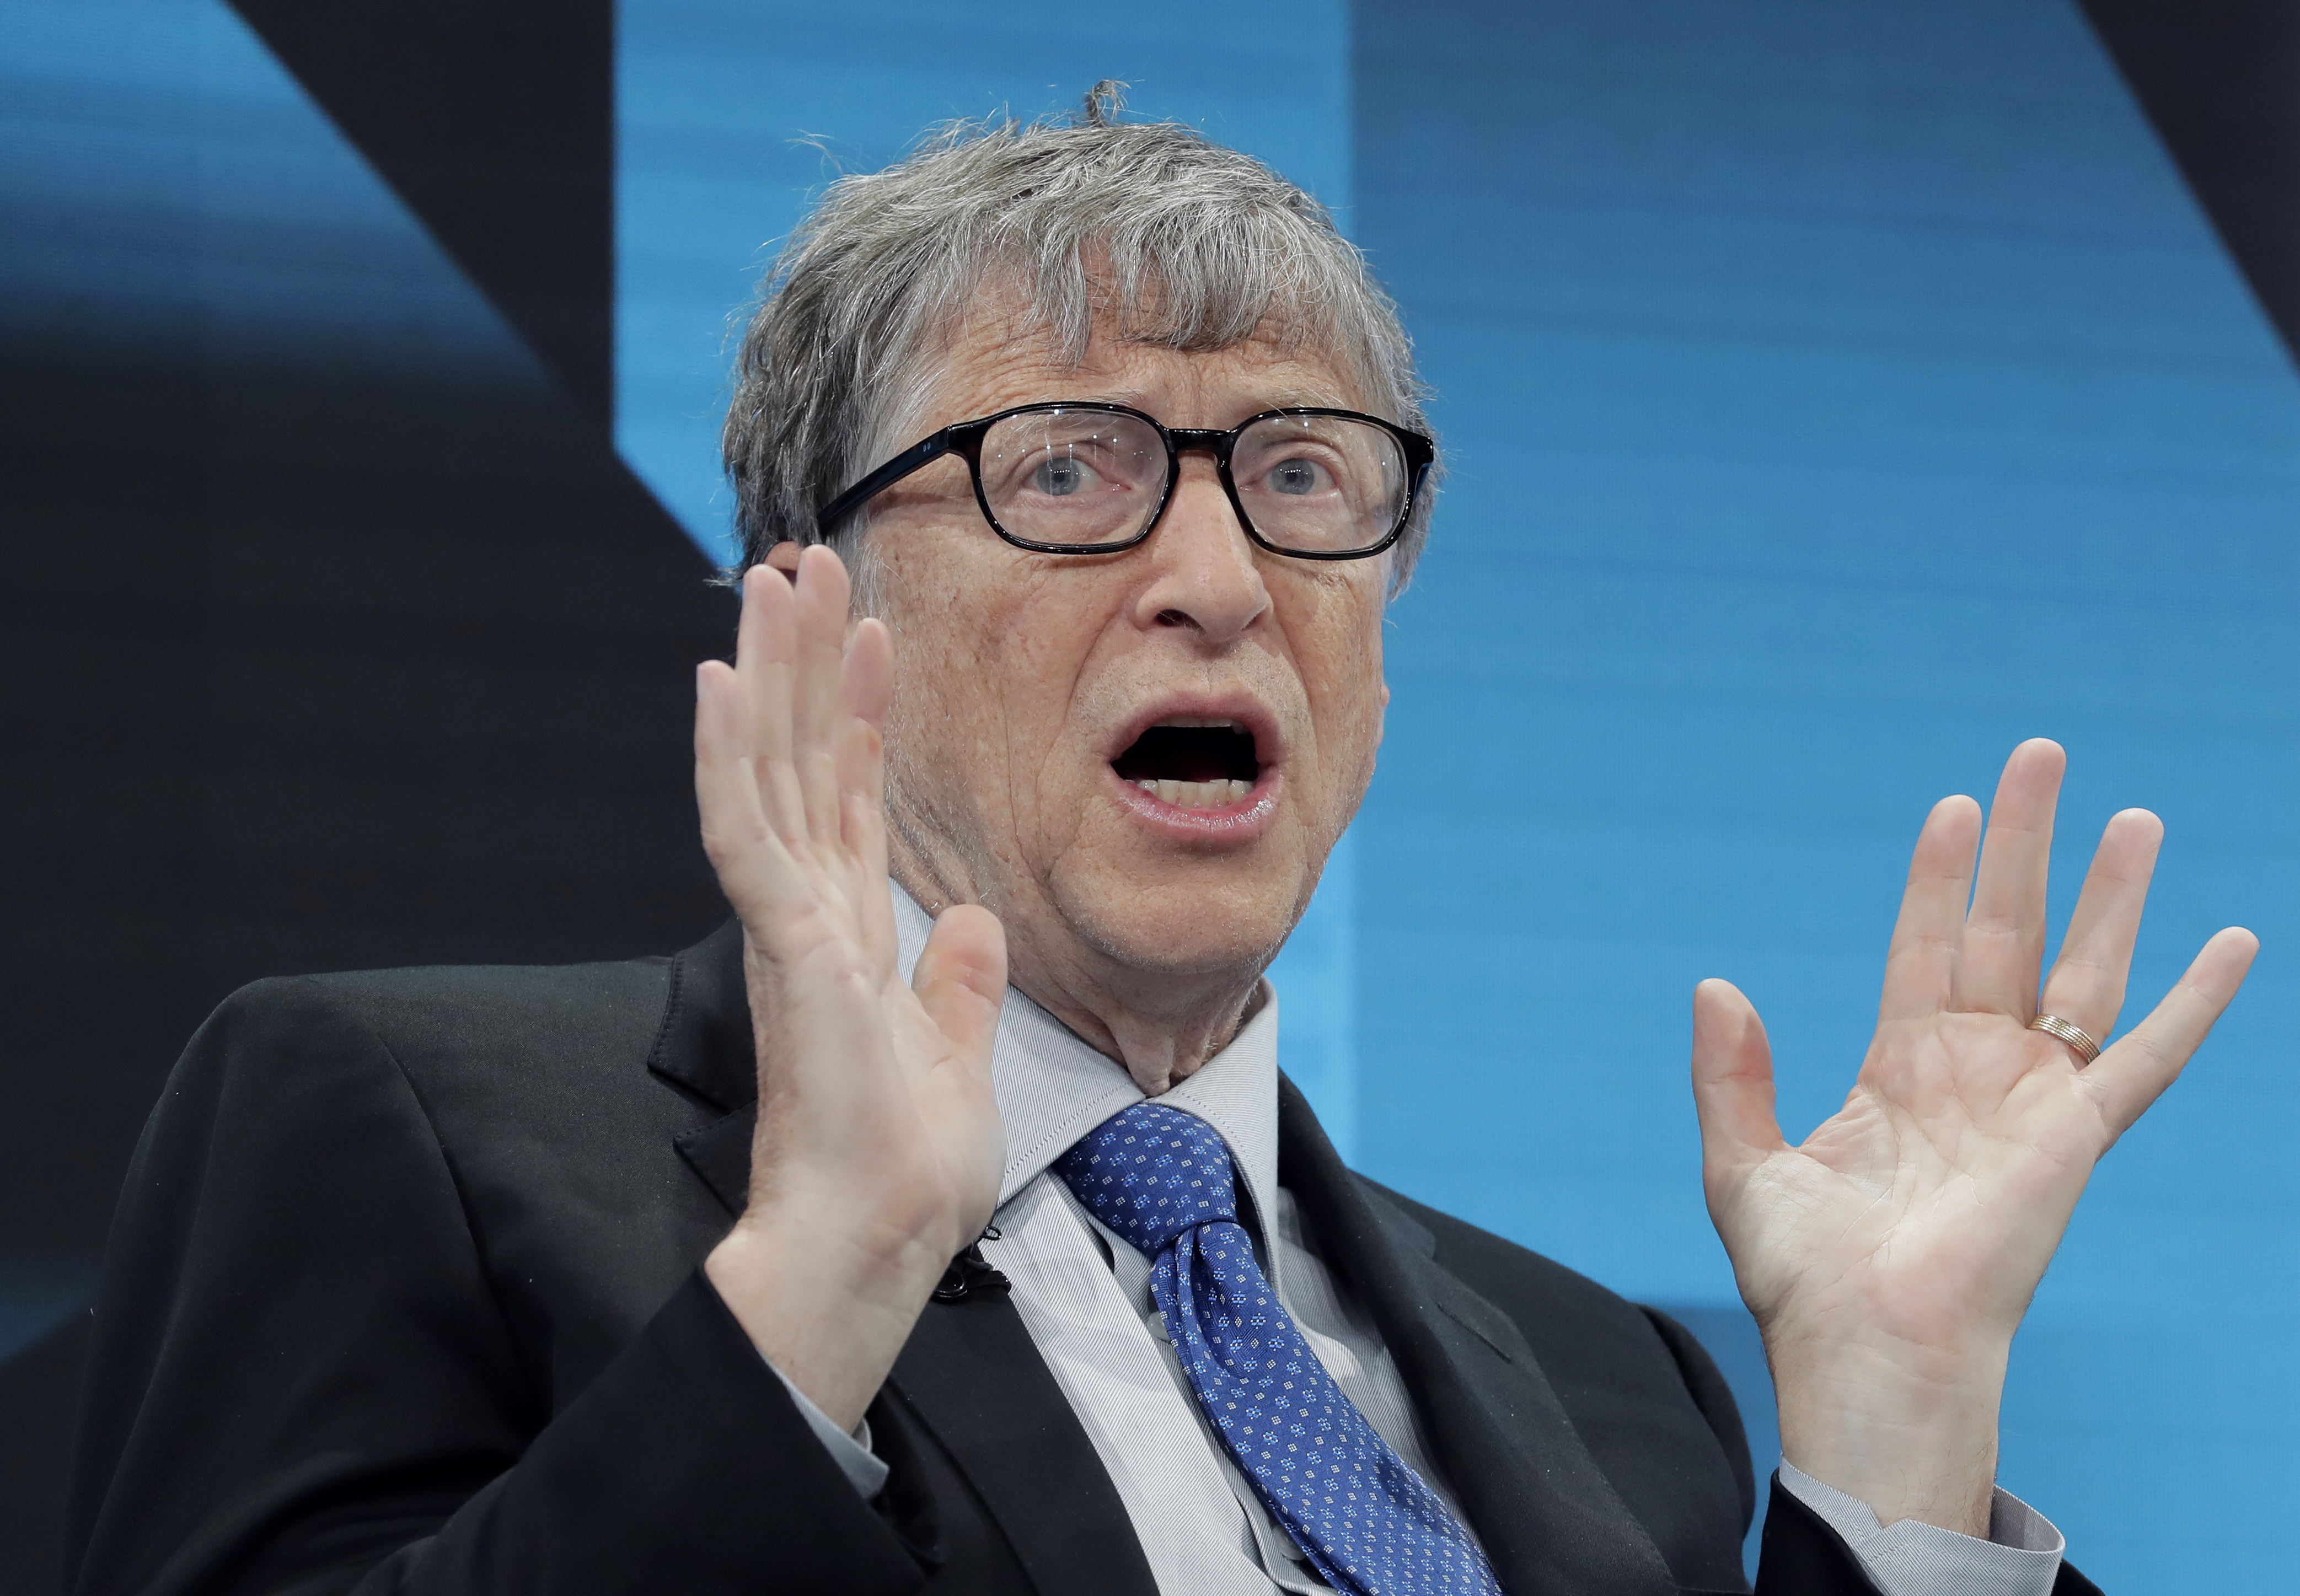 What about Microsoft? Bill Gates uses the Samsung Galaxy Fold 4 smartphone